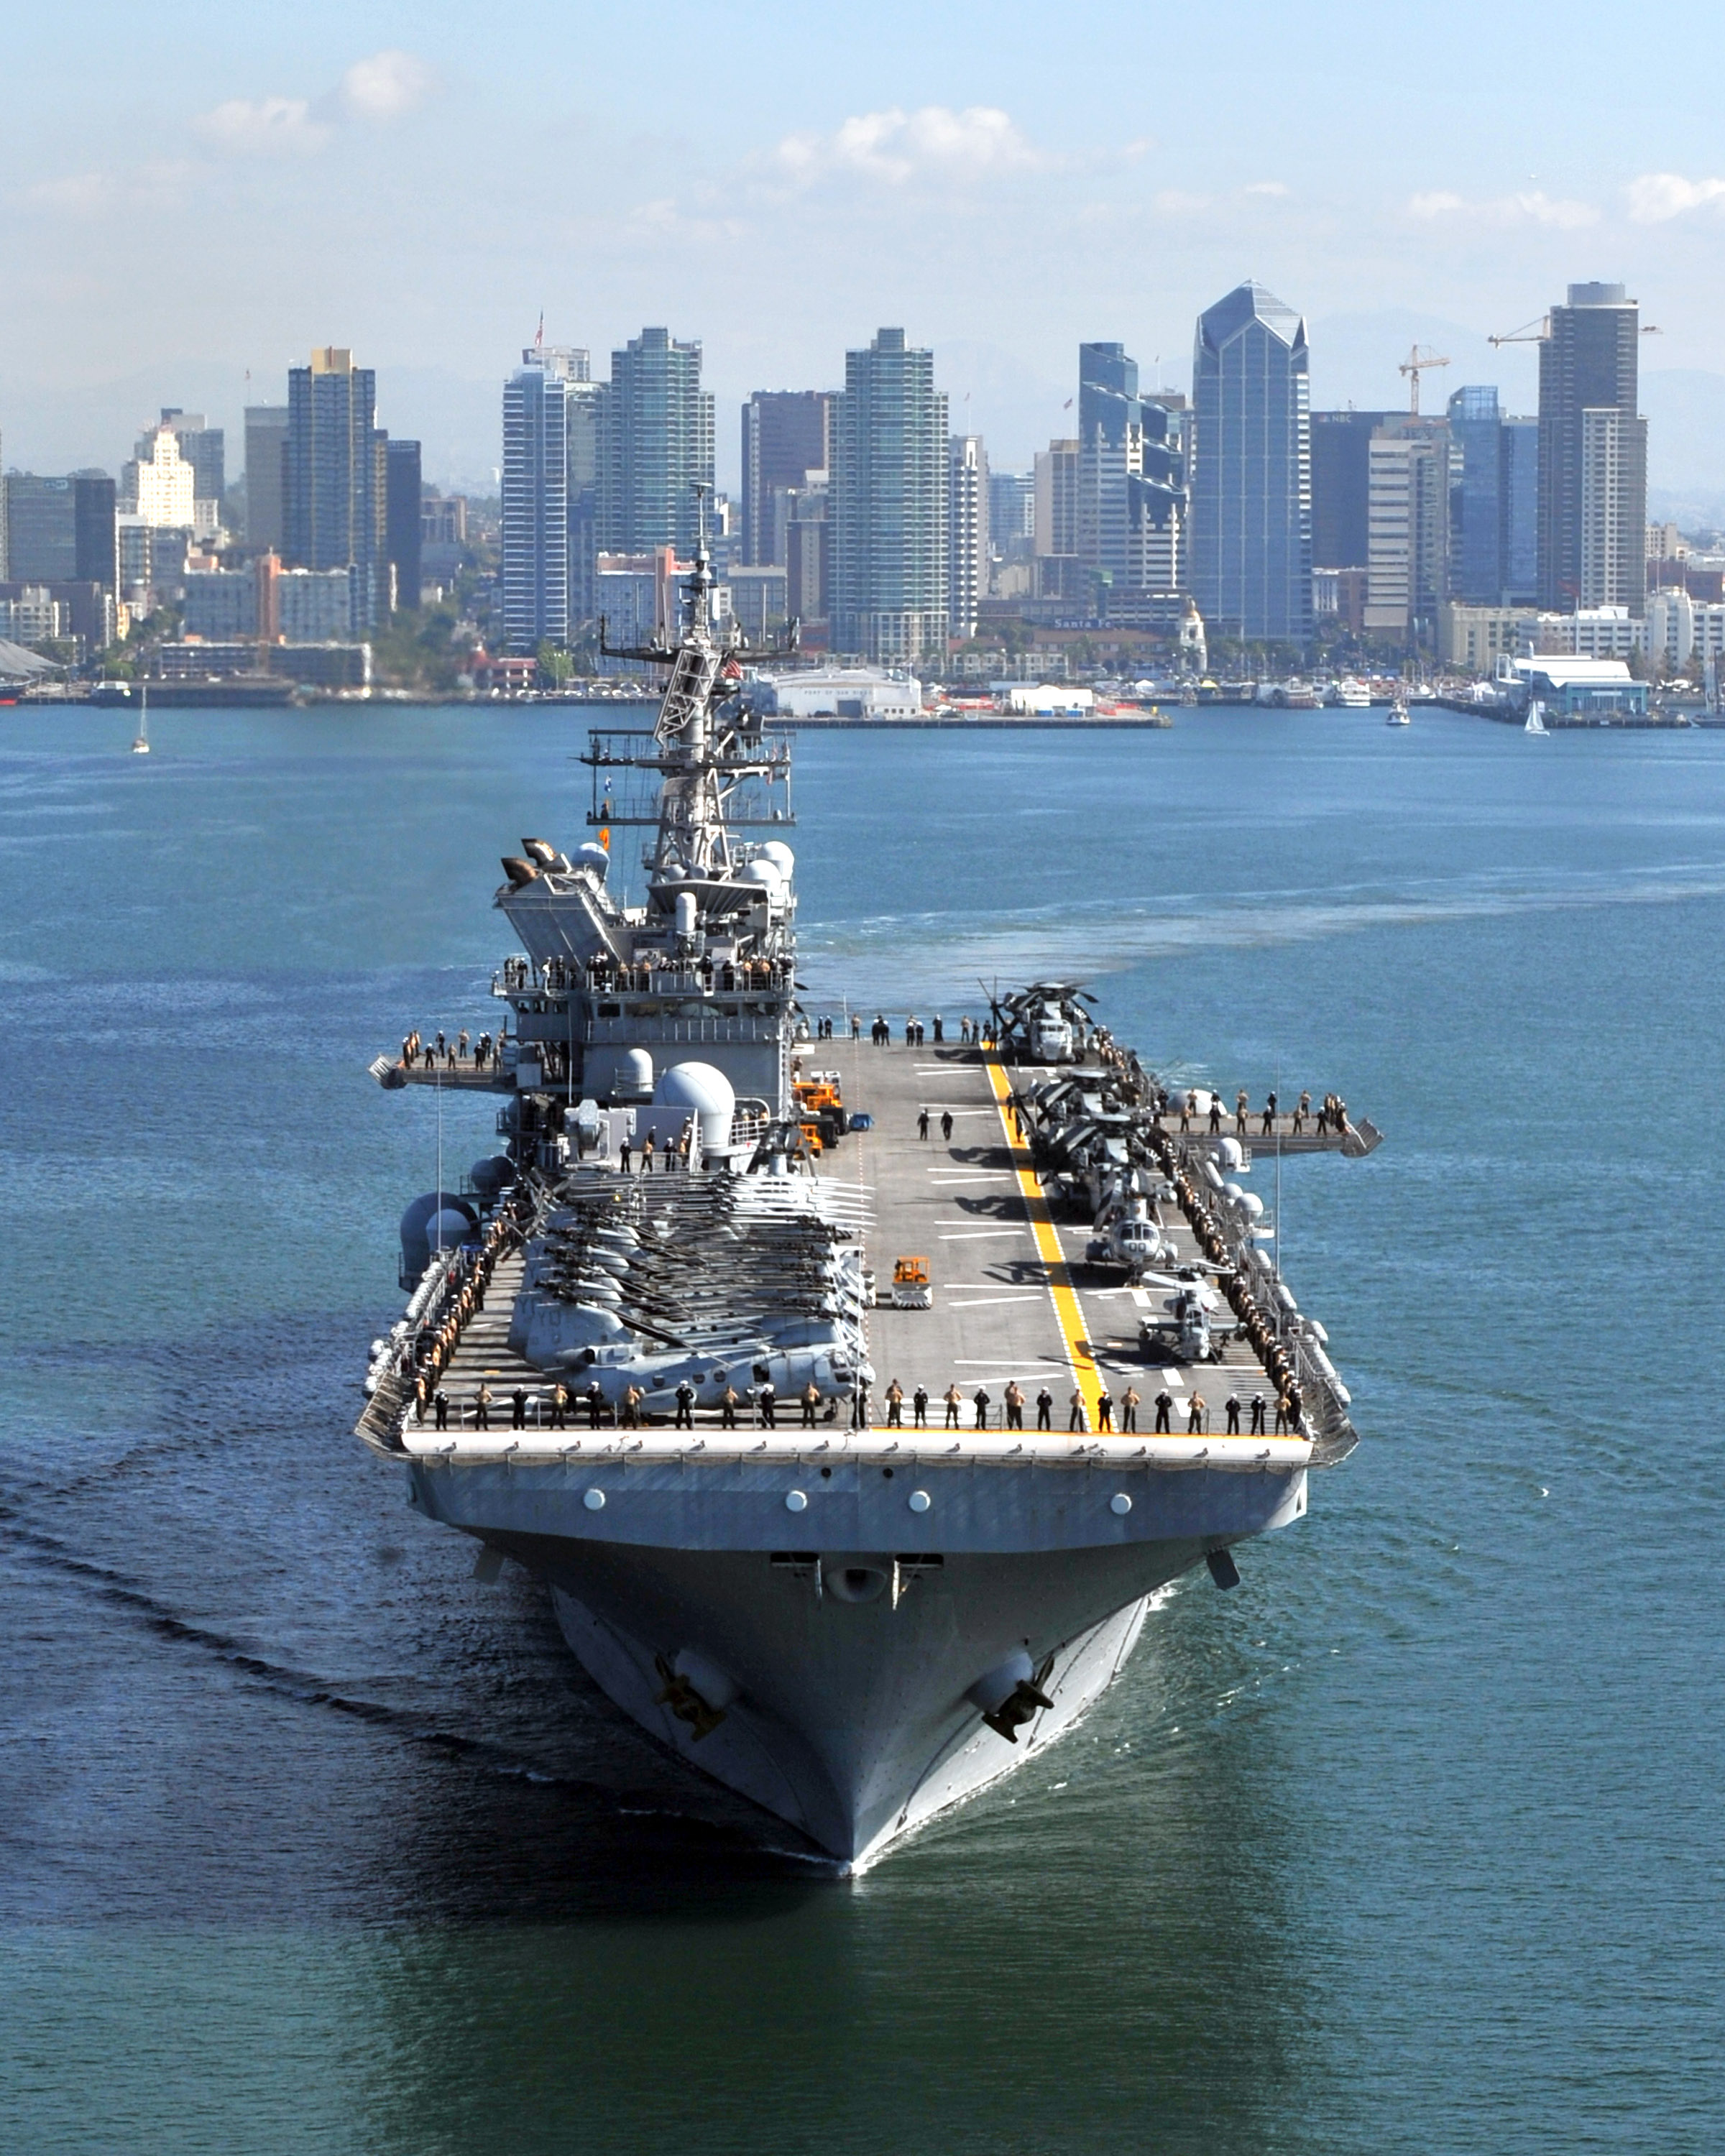 US_Navy_111114-N-KD852-188_The_amphibious_assault_ship_USS_Makin_Island_%28LHD_8%29_departs_Naval_Base_San_Diego_on_its_first_operational_deployment_to.jpg